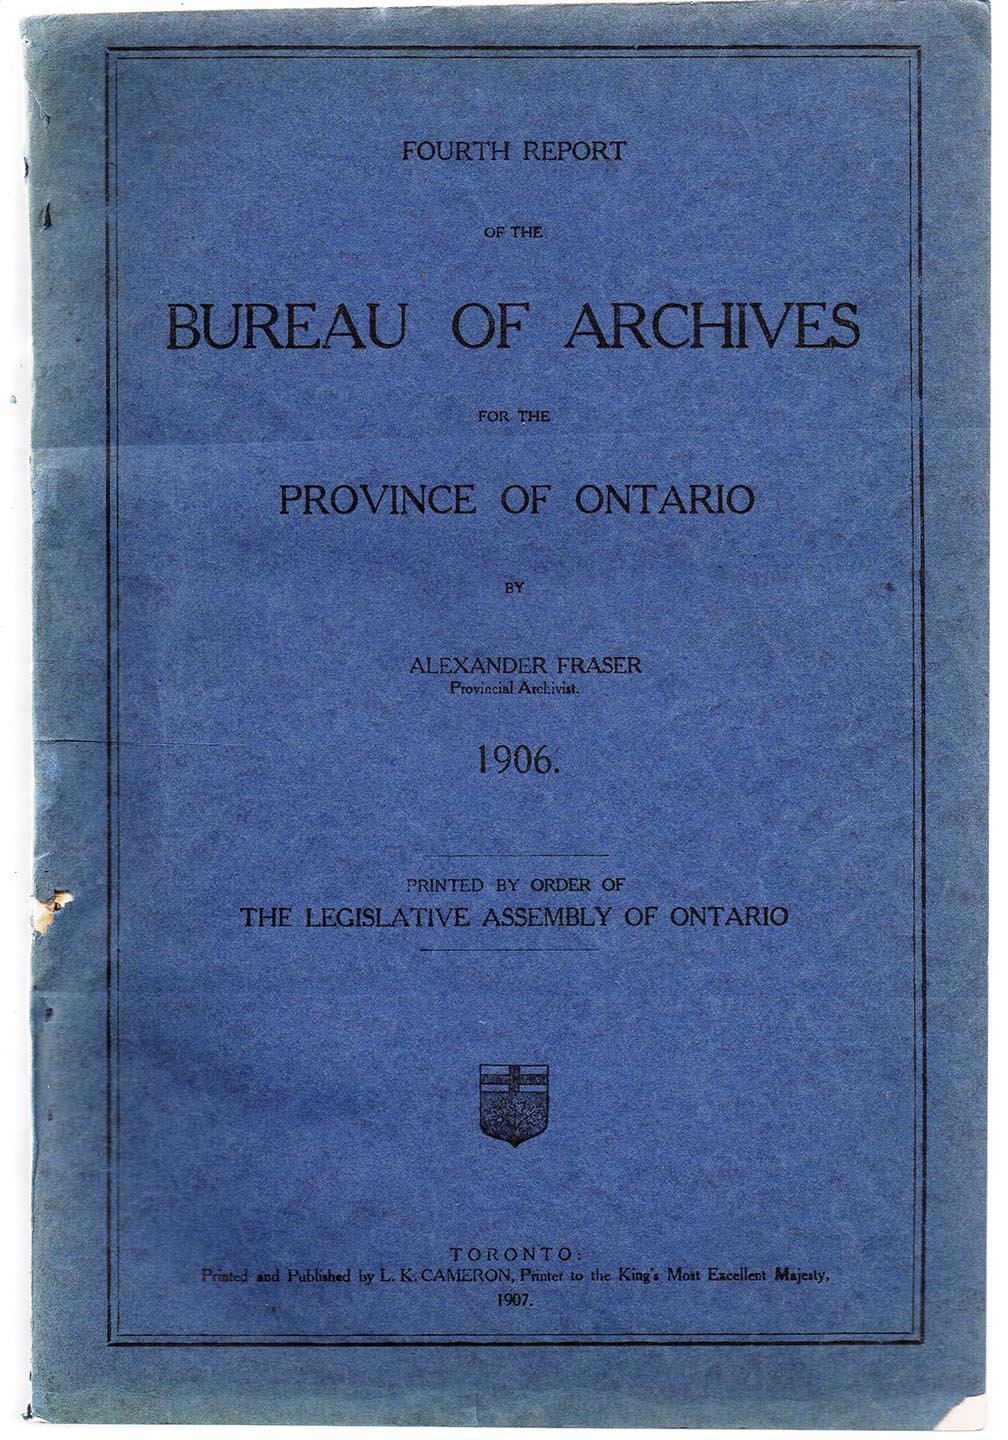 Fourth Report of the Bureau of Archives for the Province of Ontario, 1906